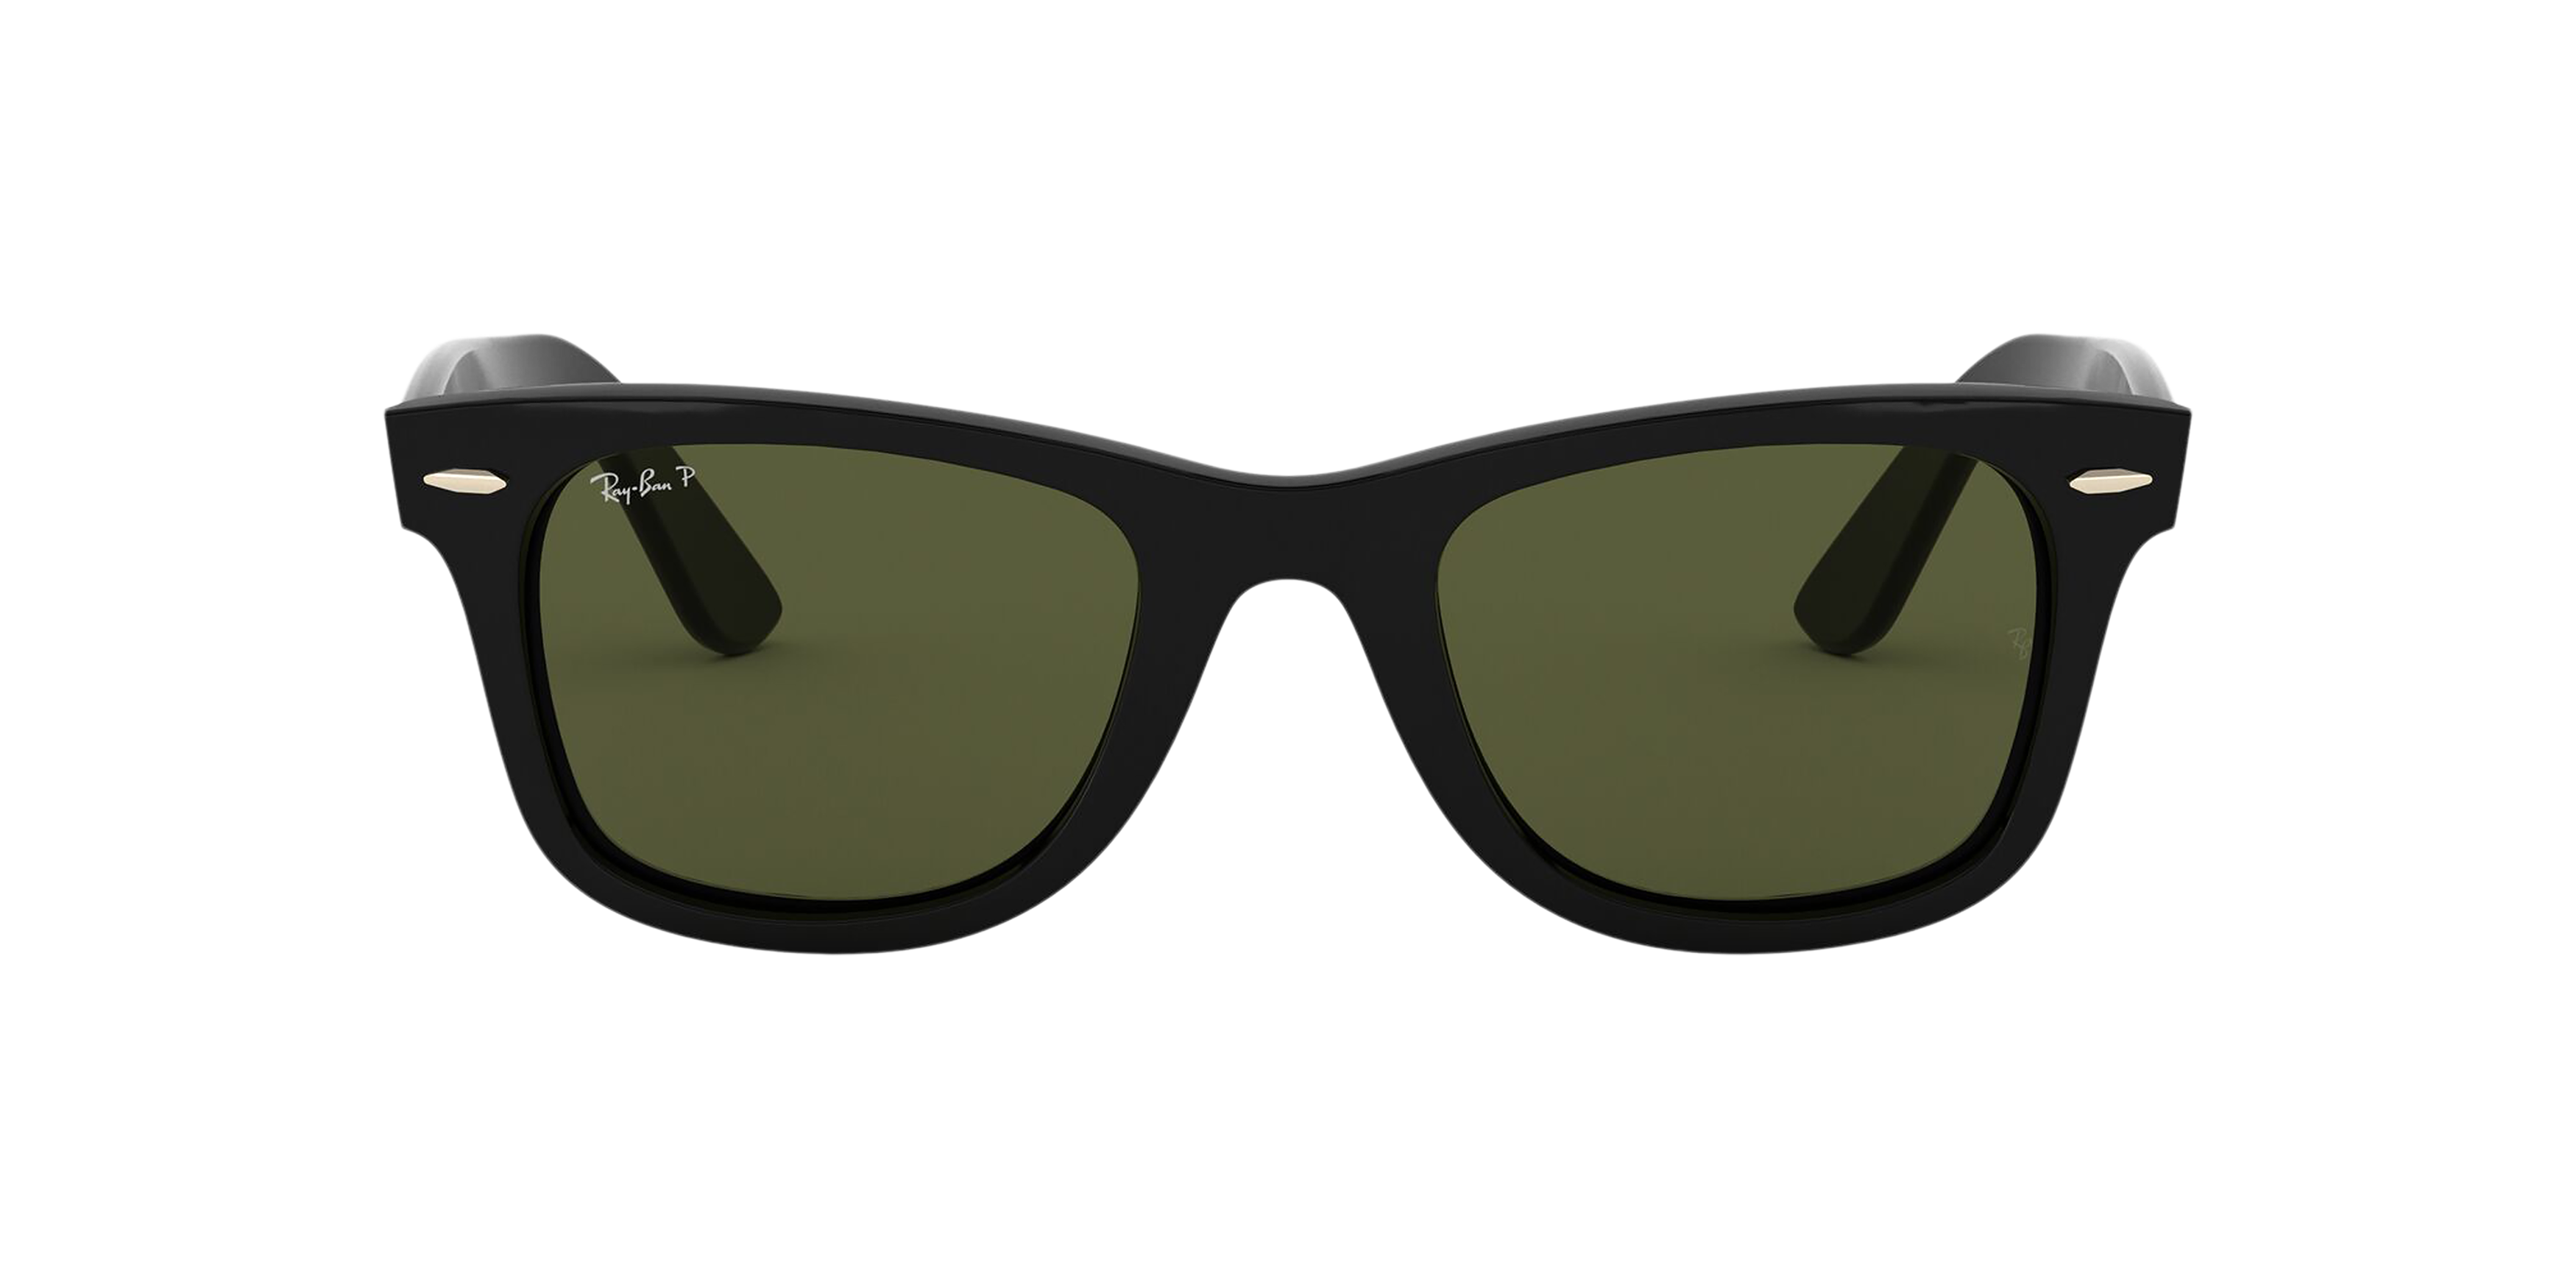 [products.image.front] Ray-Ban Wayfarer Ease RB4340 601/58